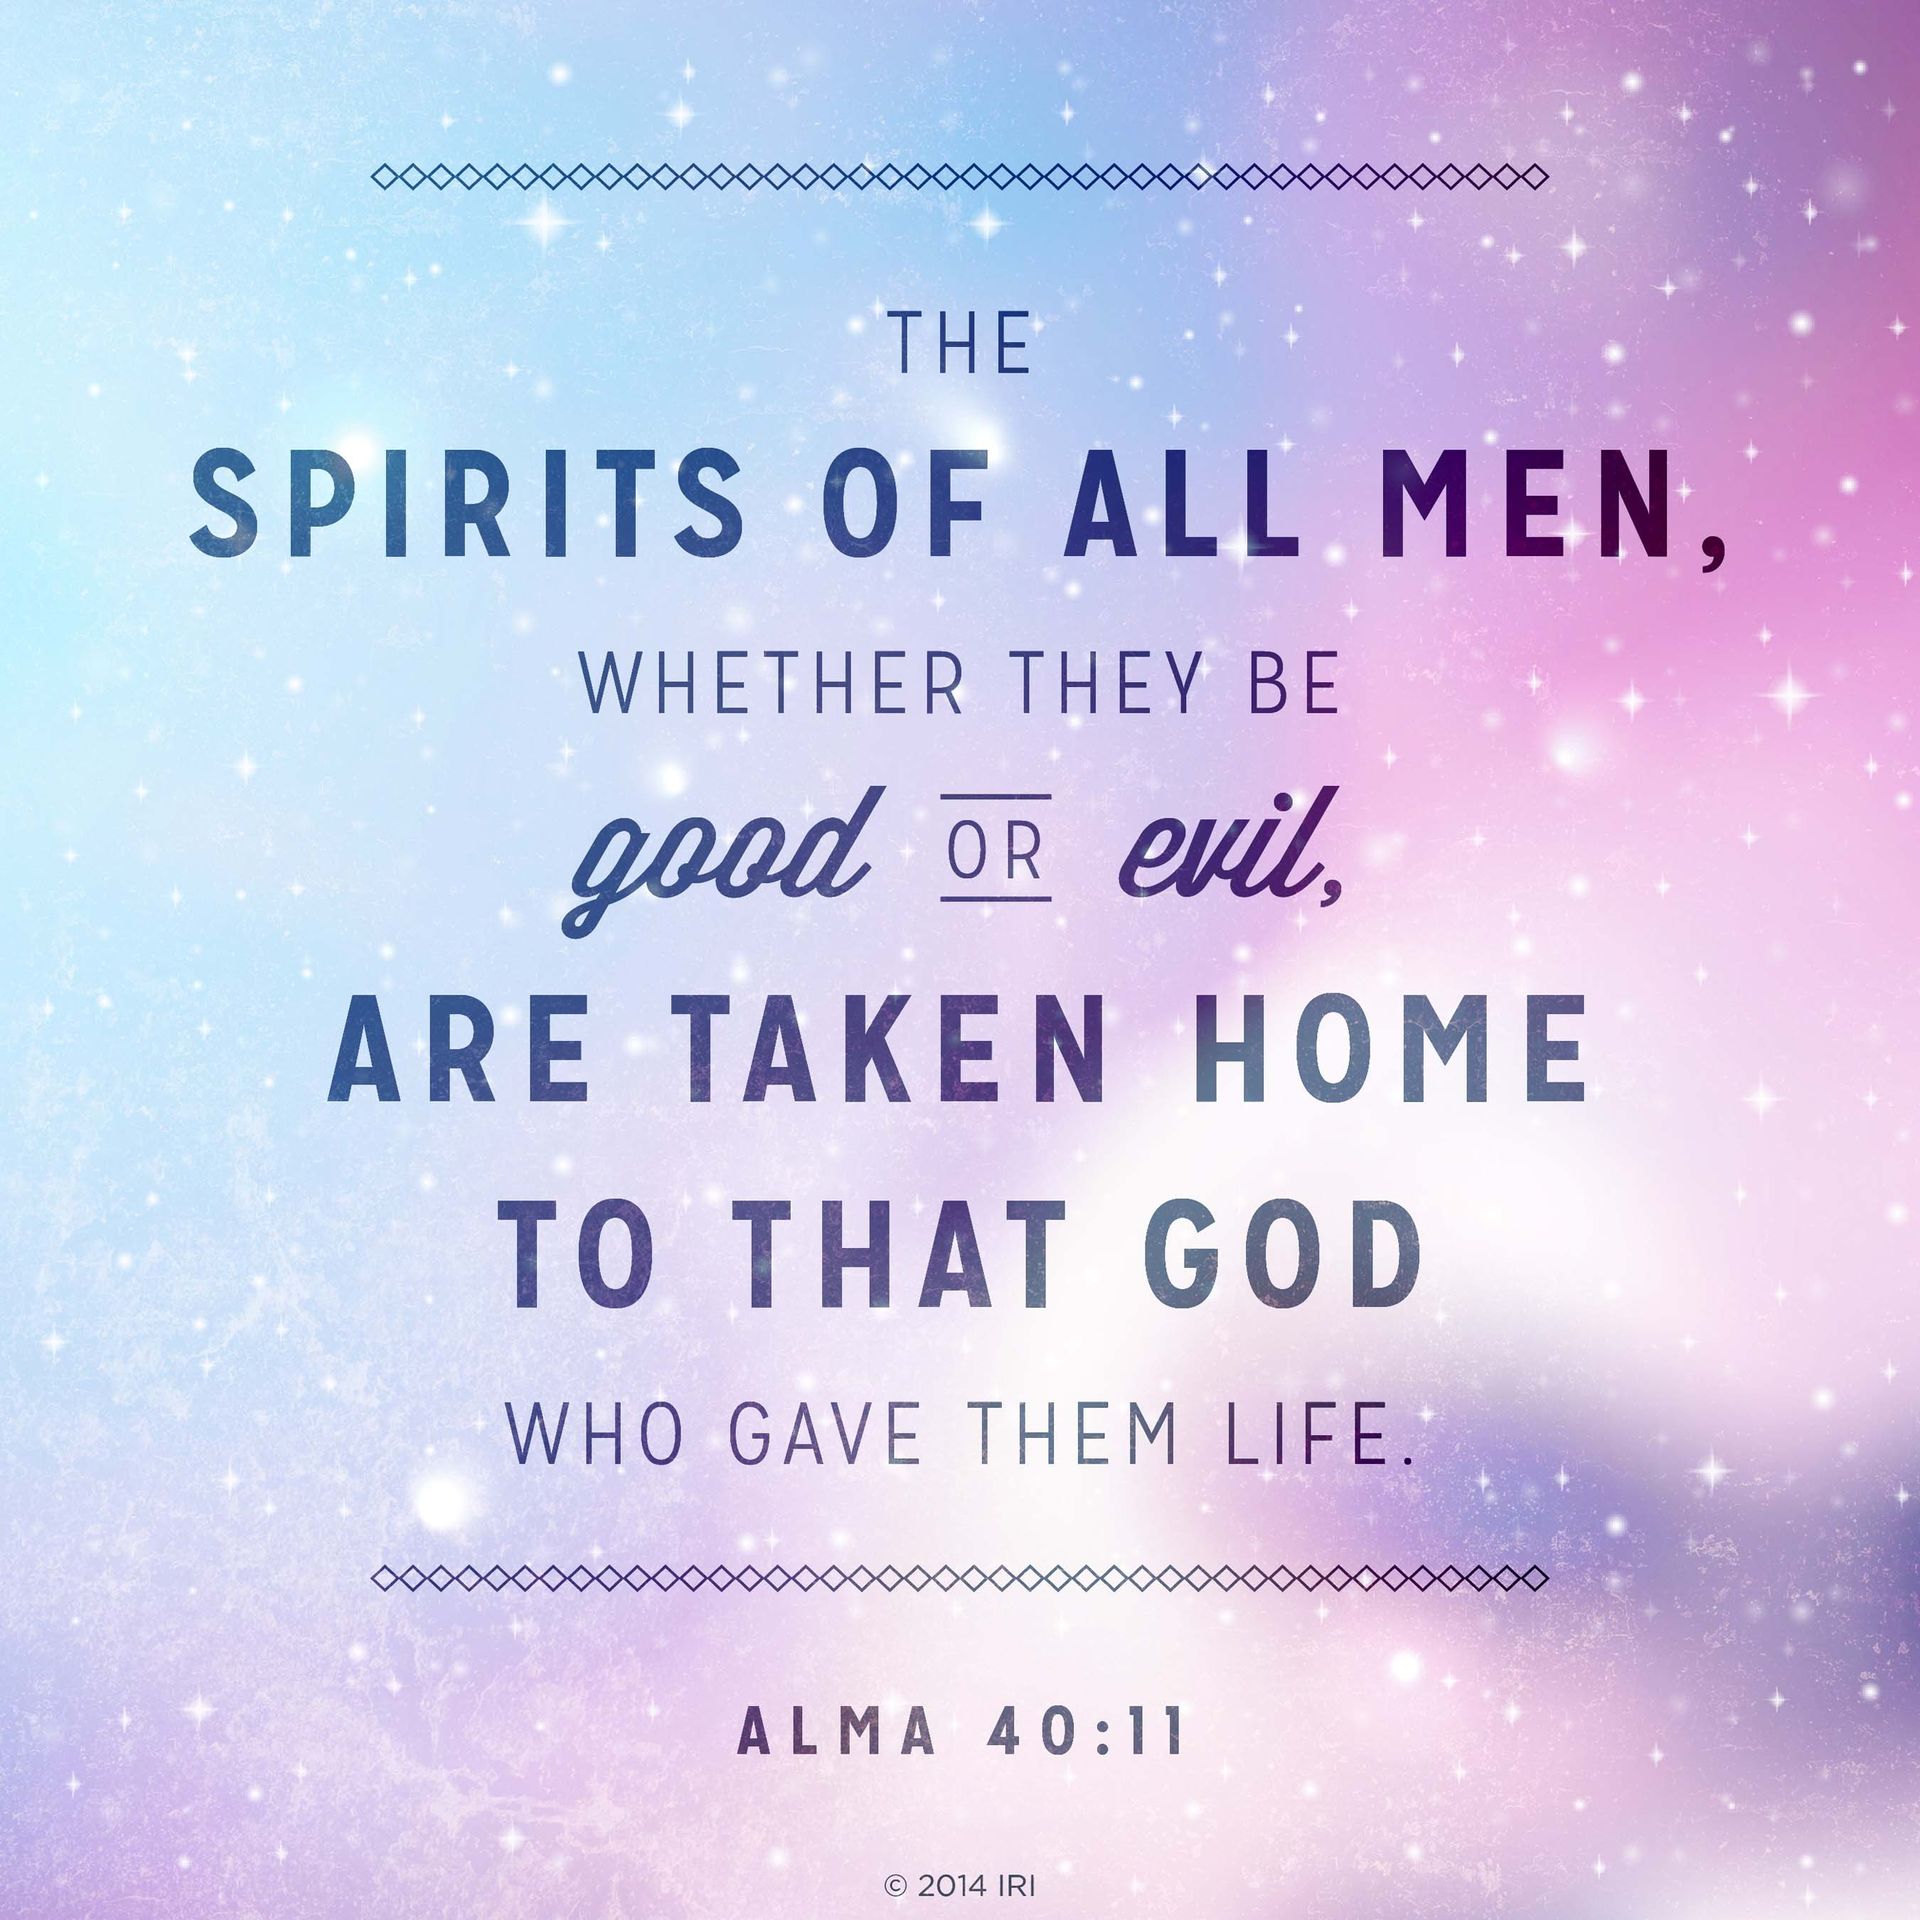 “The spirits of all men, whether they be good or evil, are taken home to that God who gave them life.”—Alma 40:11